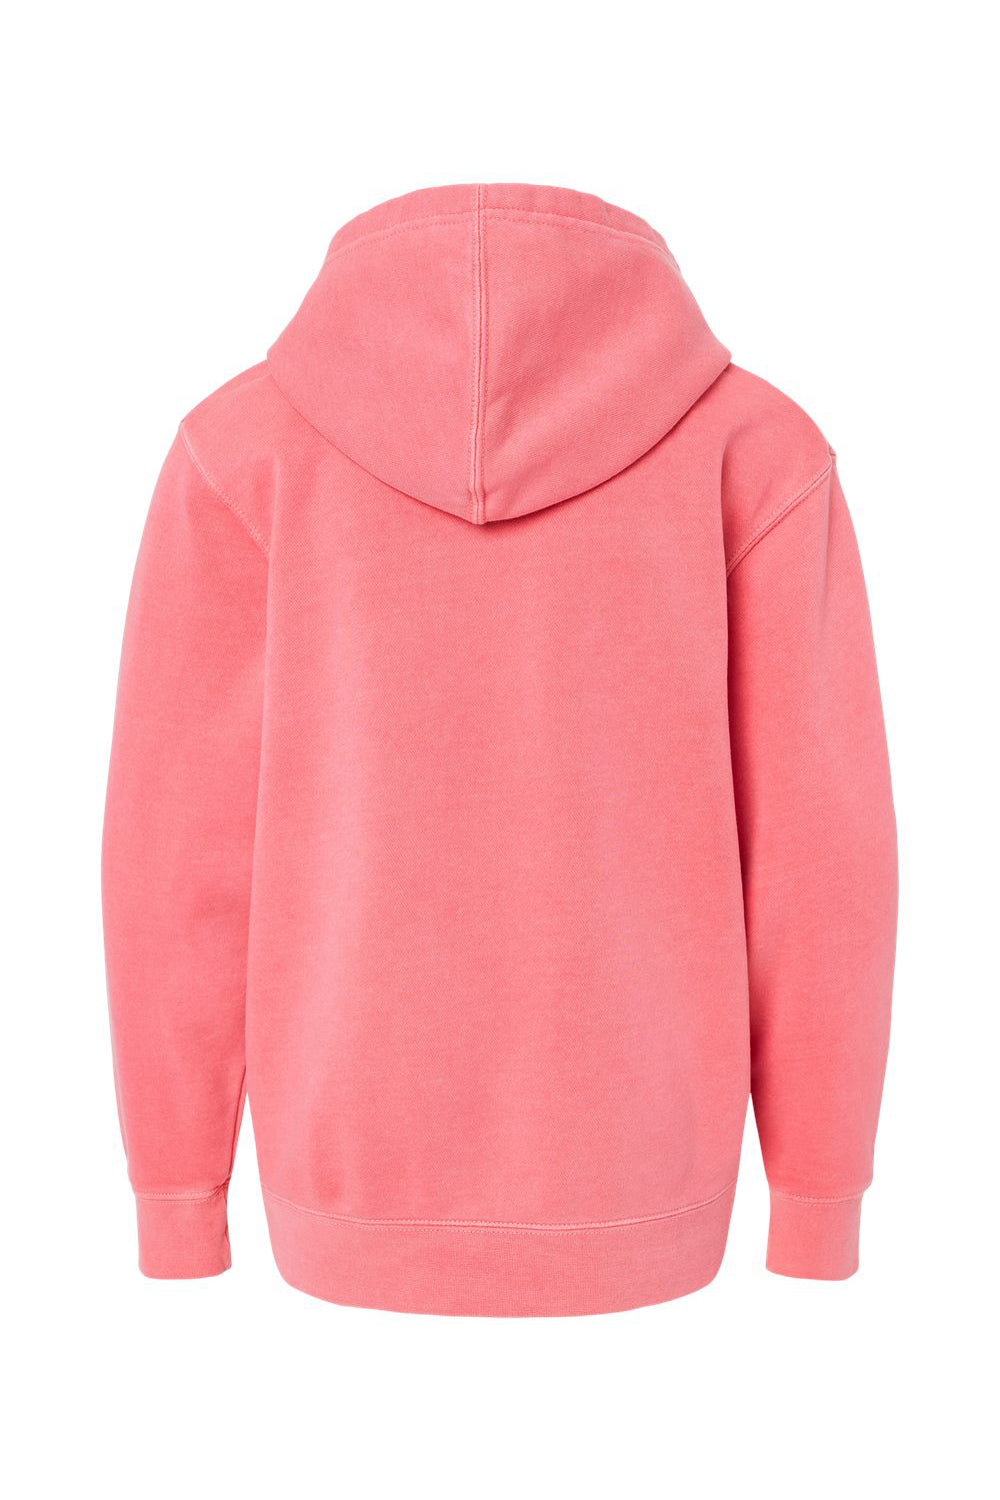 Independent Trading Co. PRM1500Y Youth Pigment Dyed Hooded Sweatshirt Hoodie Pink Flat Back